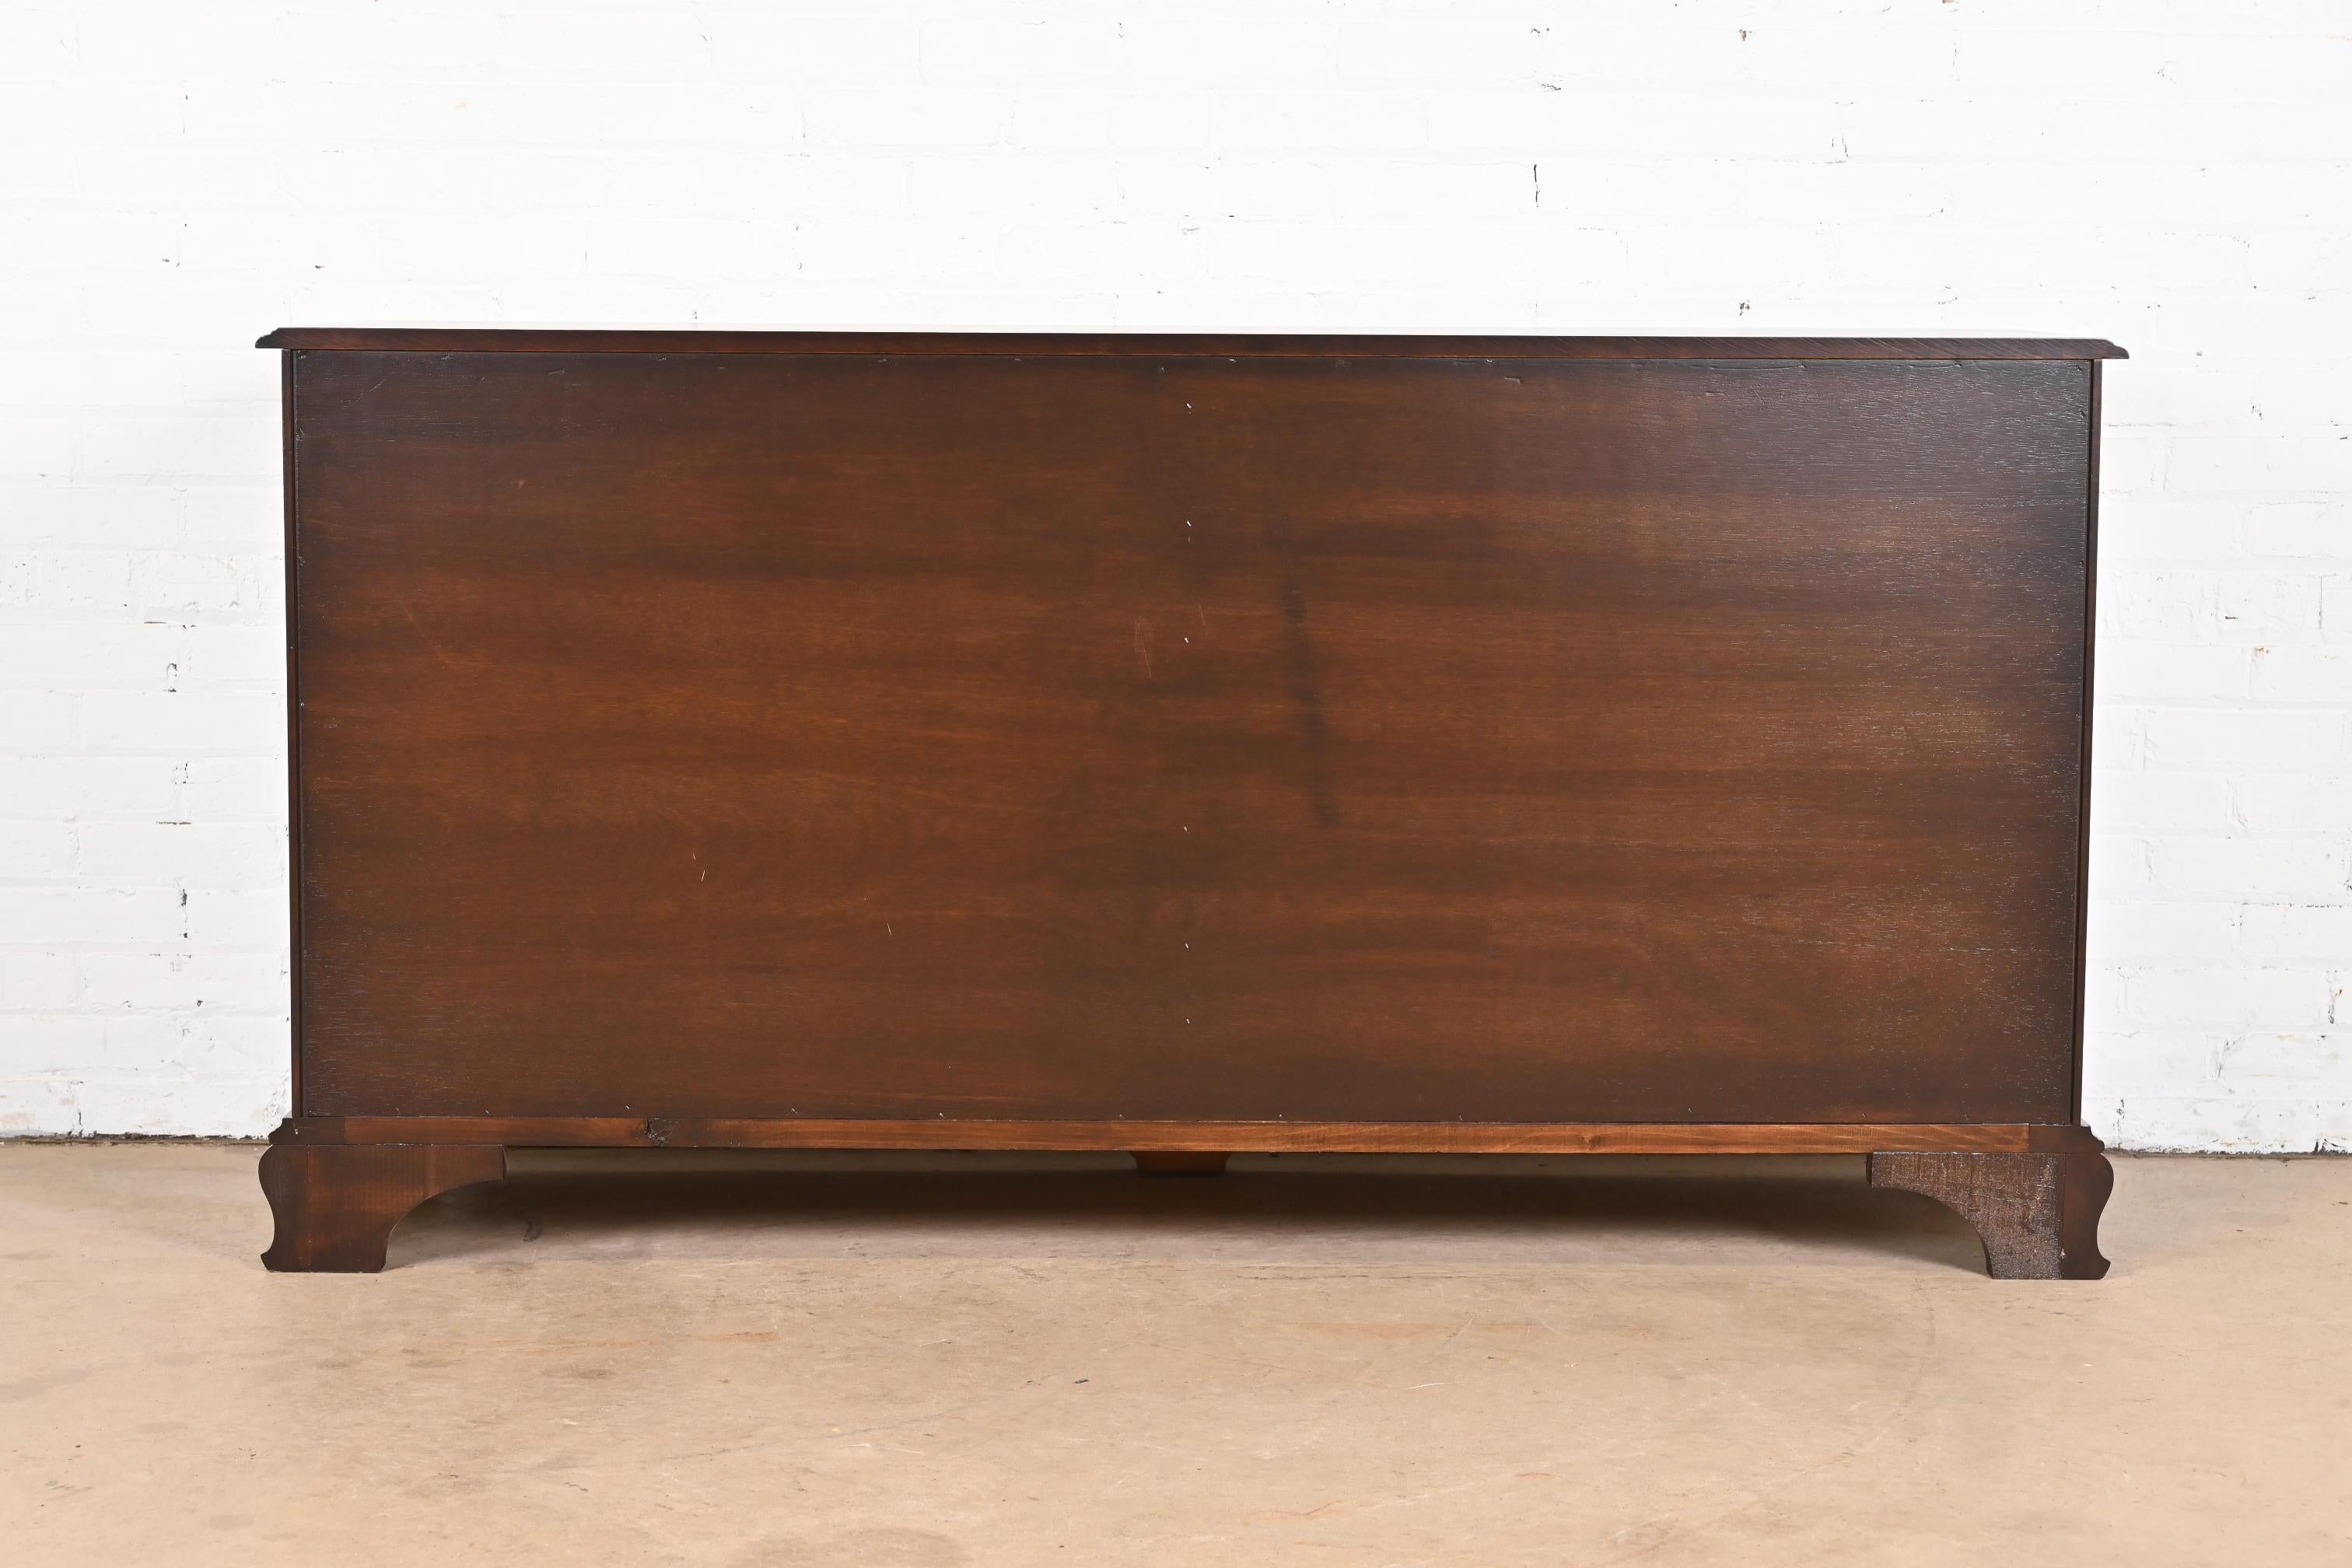 Harden Furniture Georgian Carved Solid Cherry Wood Long Dresser, Newly Restored For Sale 7